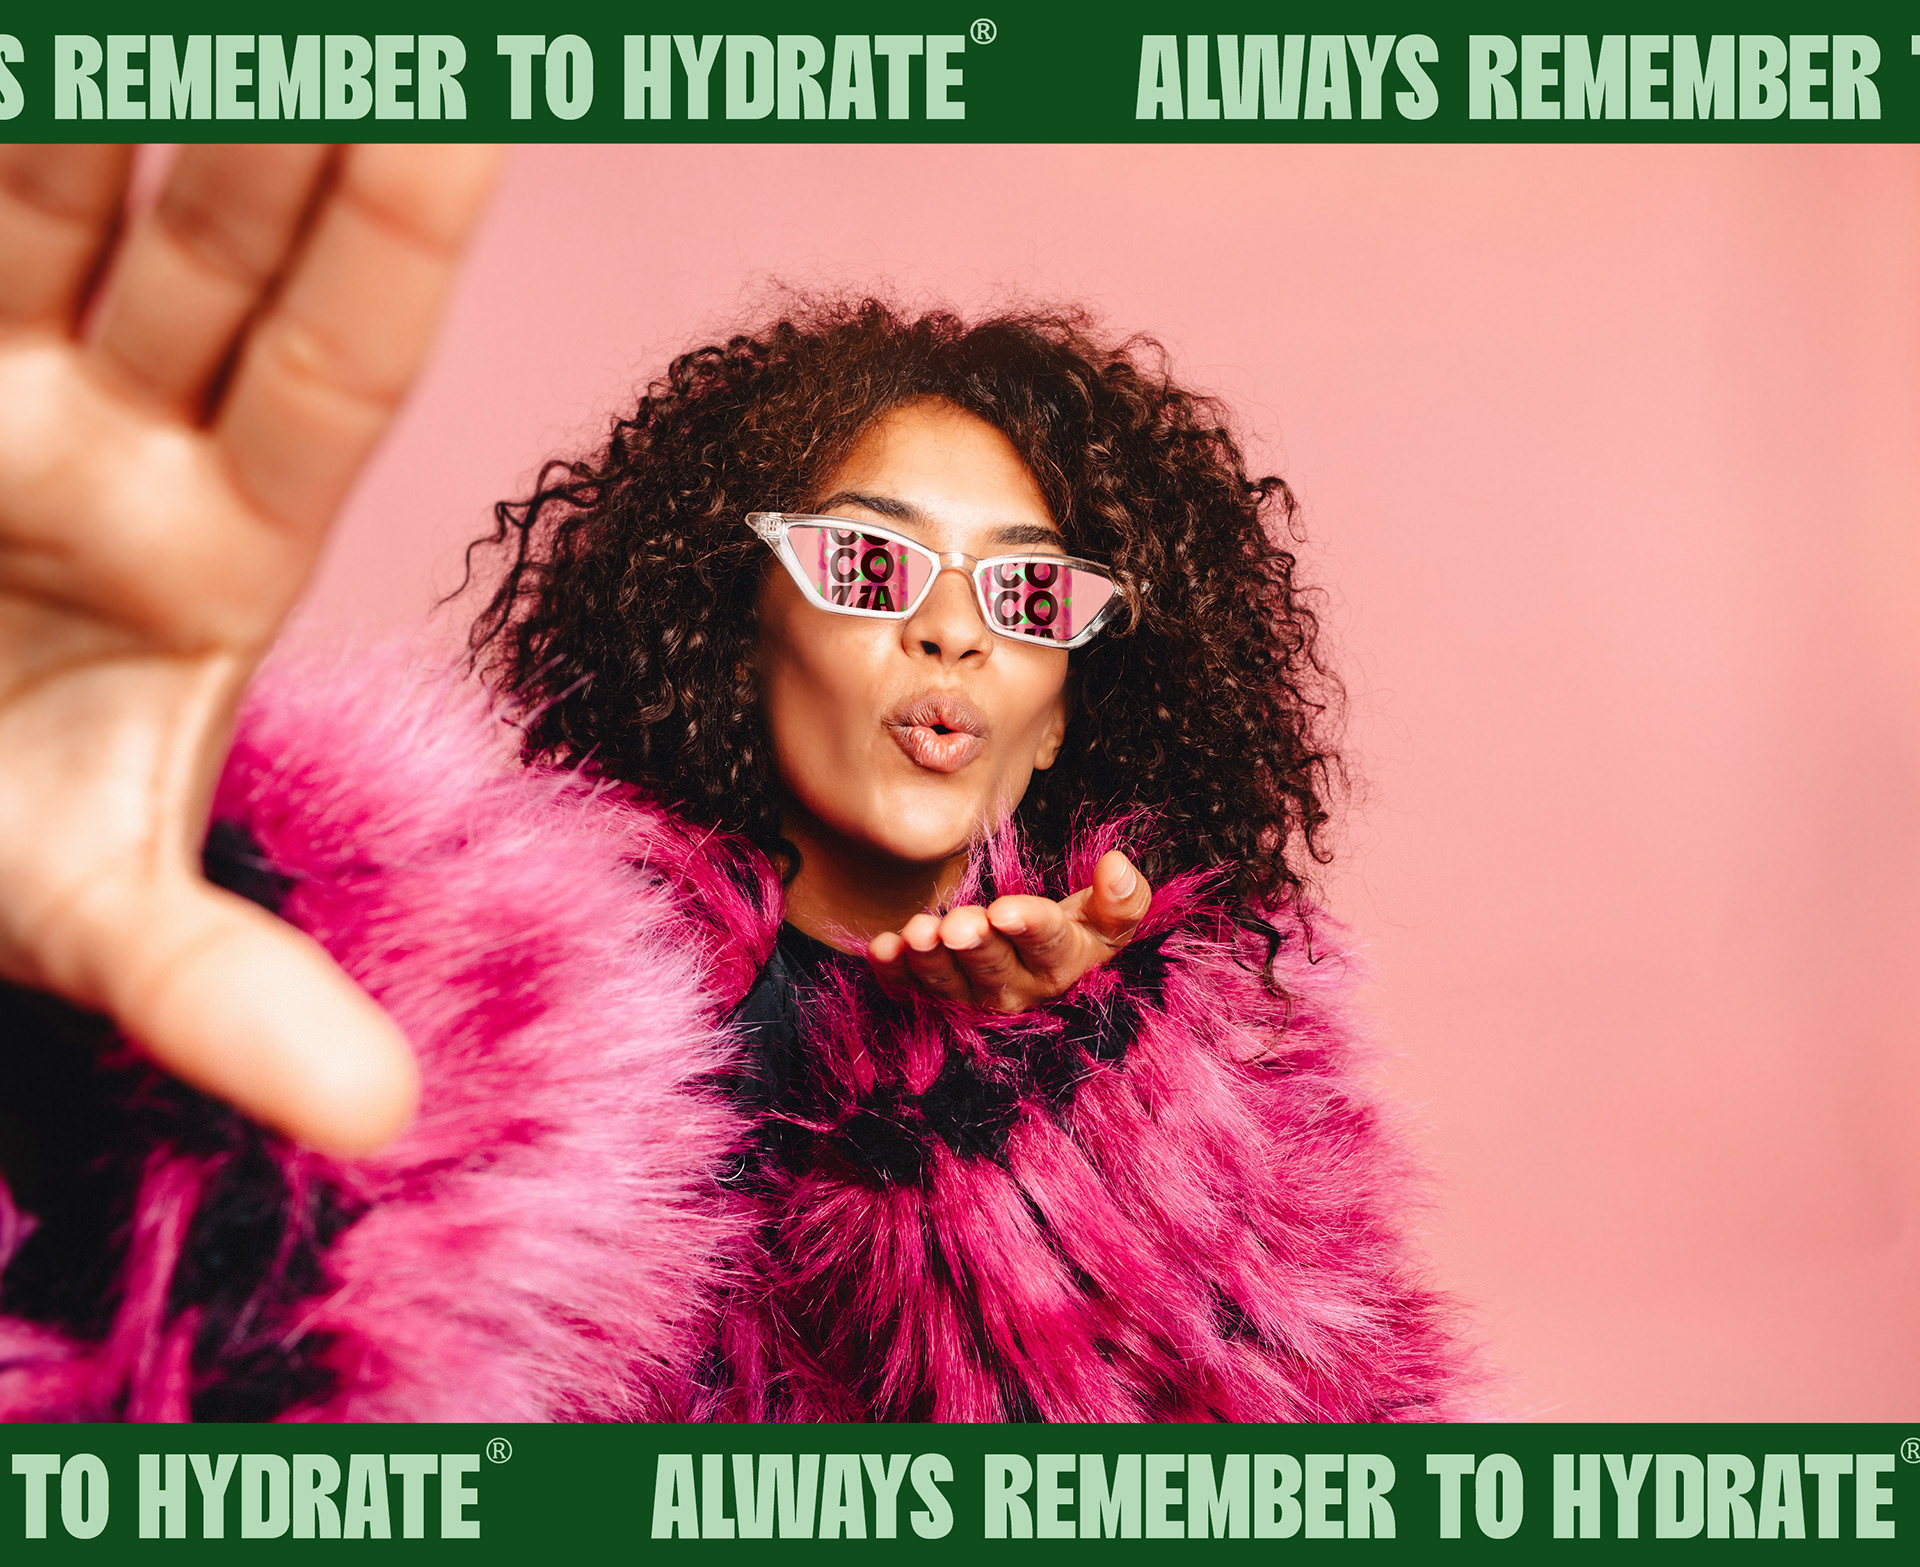 Always Remember to Hydrate